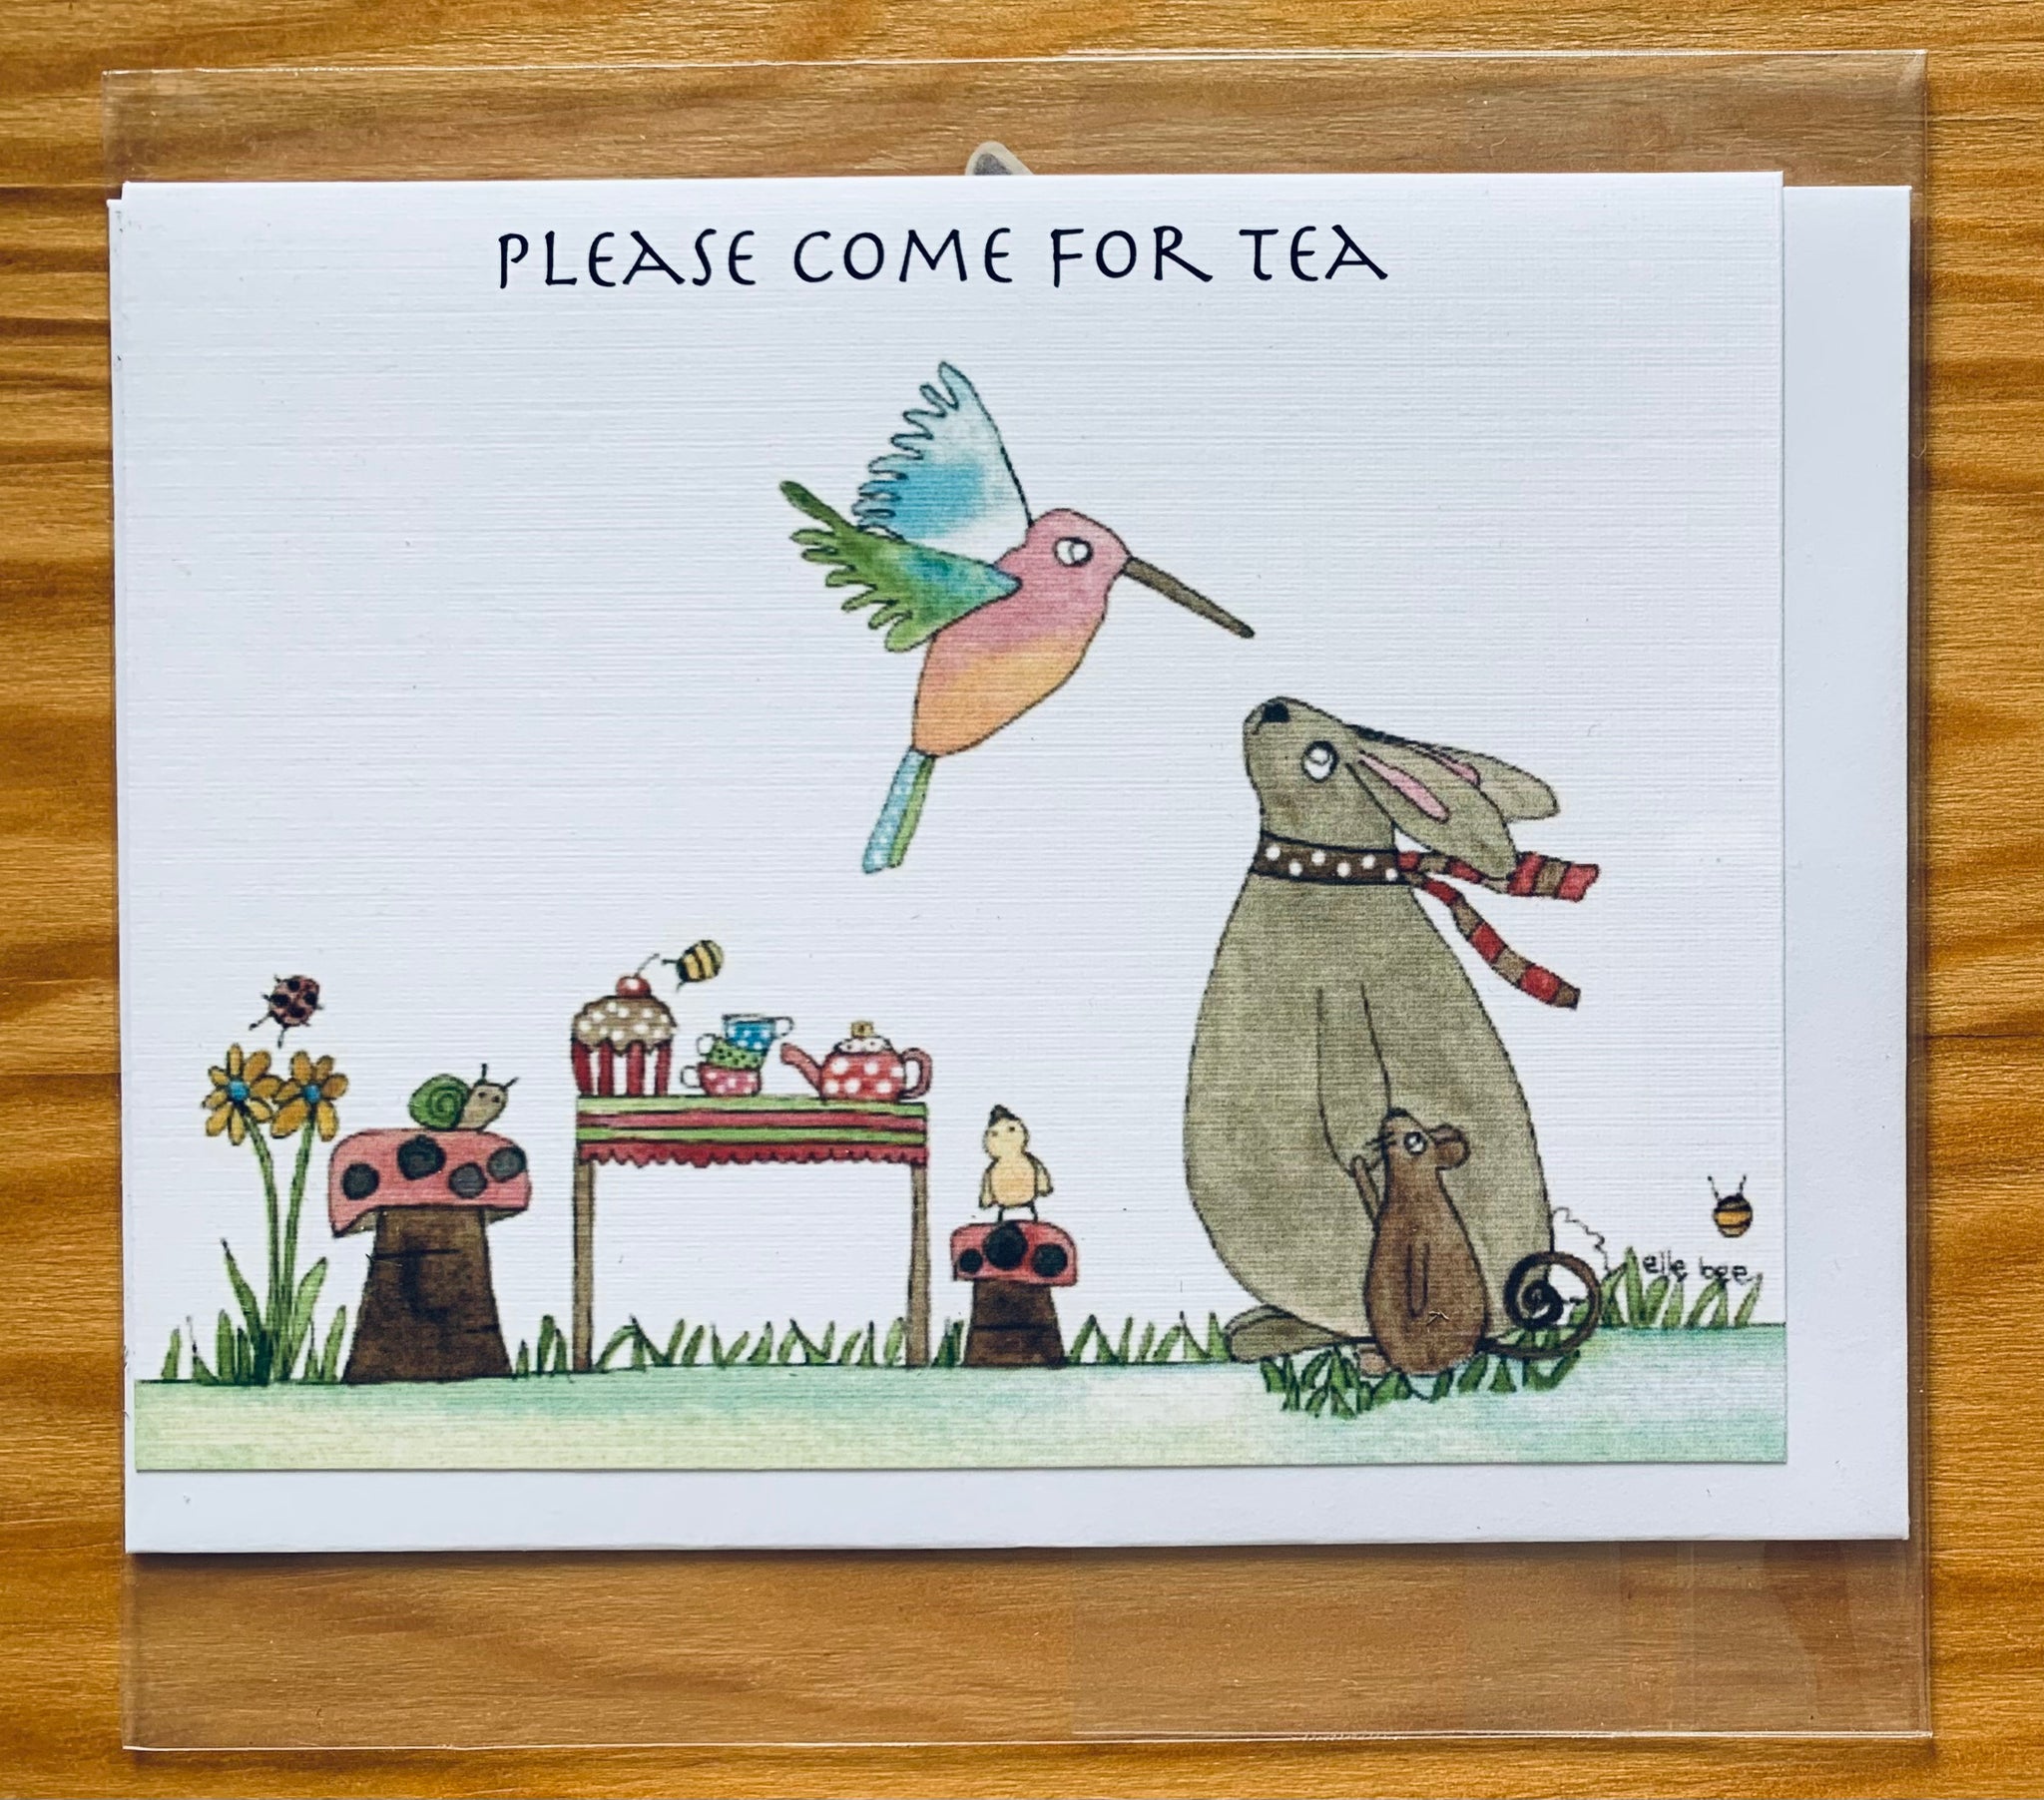 "Please come for tea" greeting card